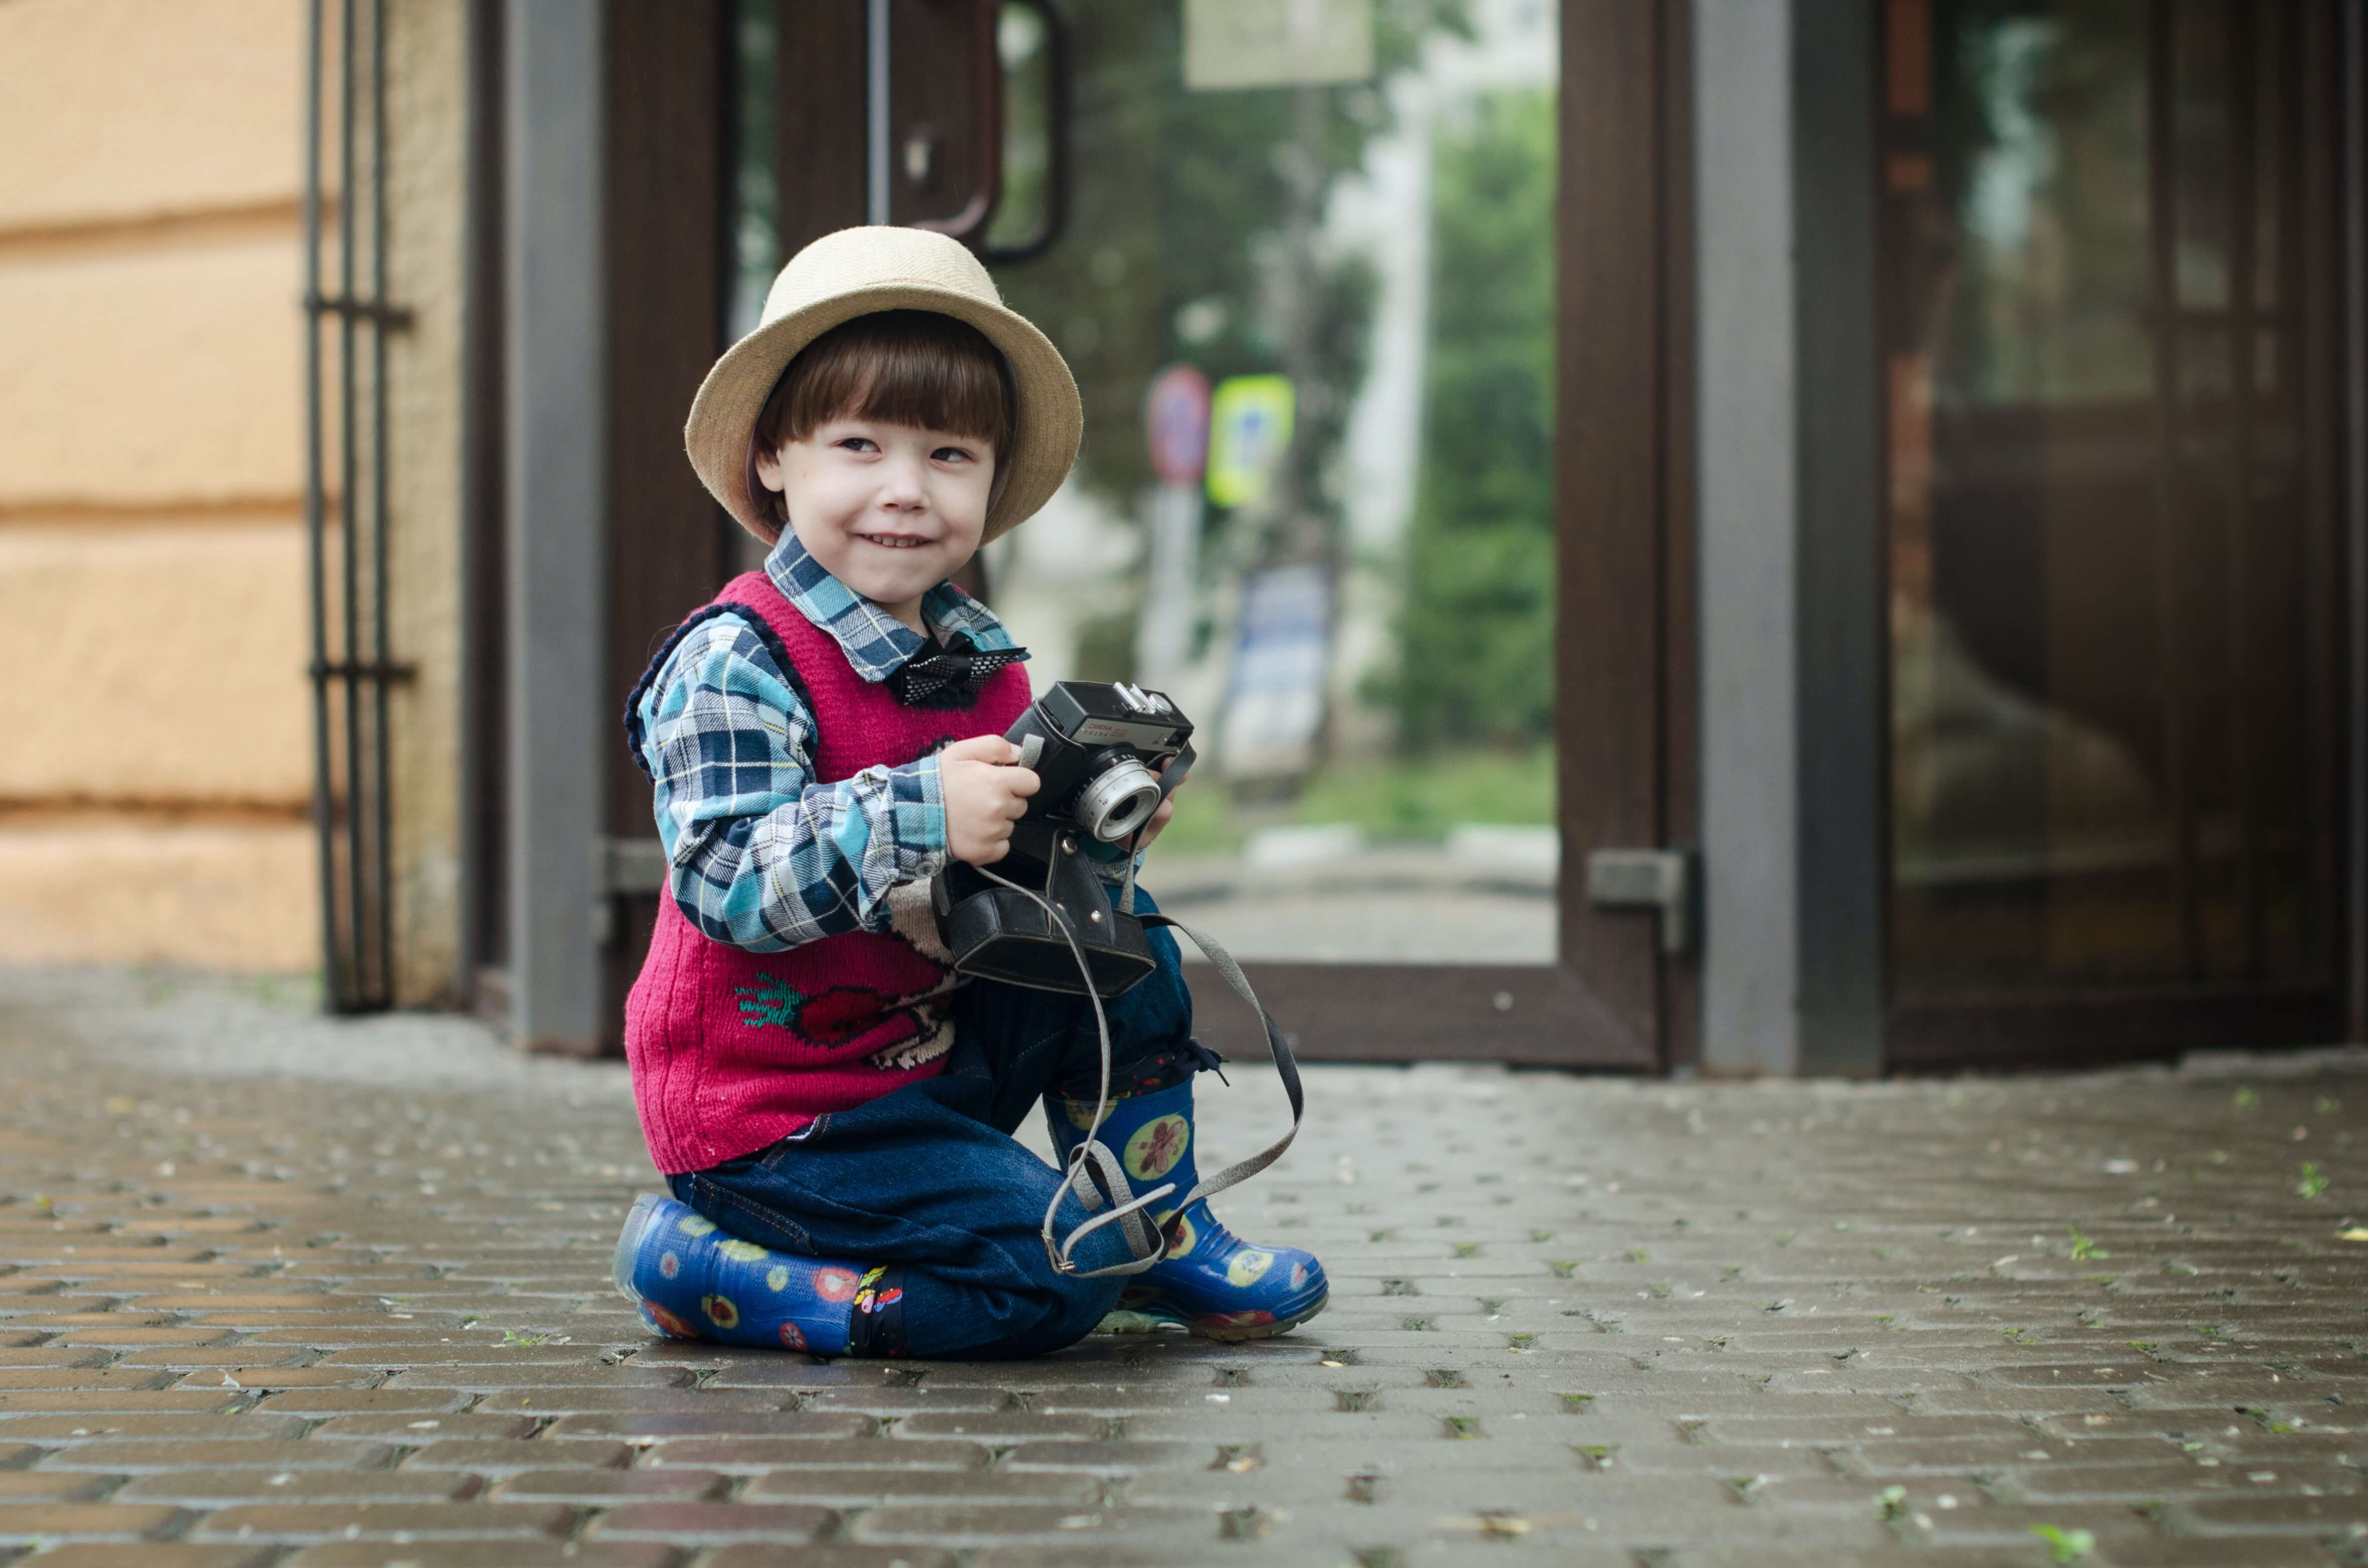 Child kneeling on ground playing with a camera and smiling